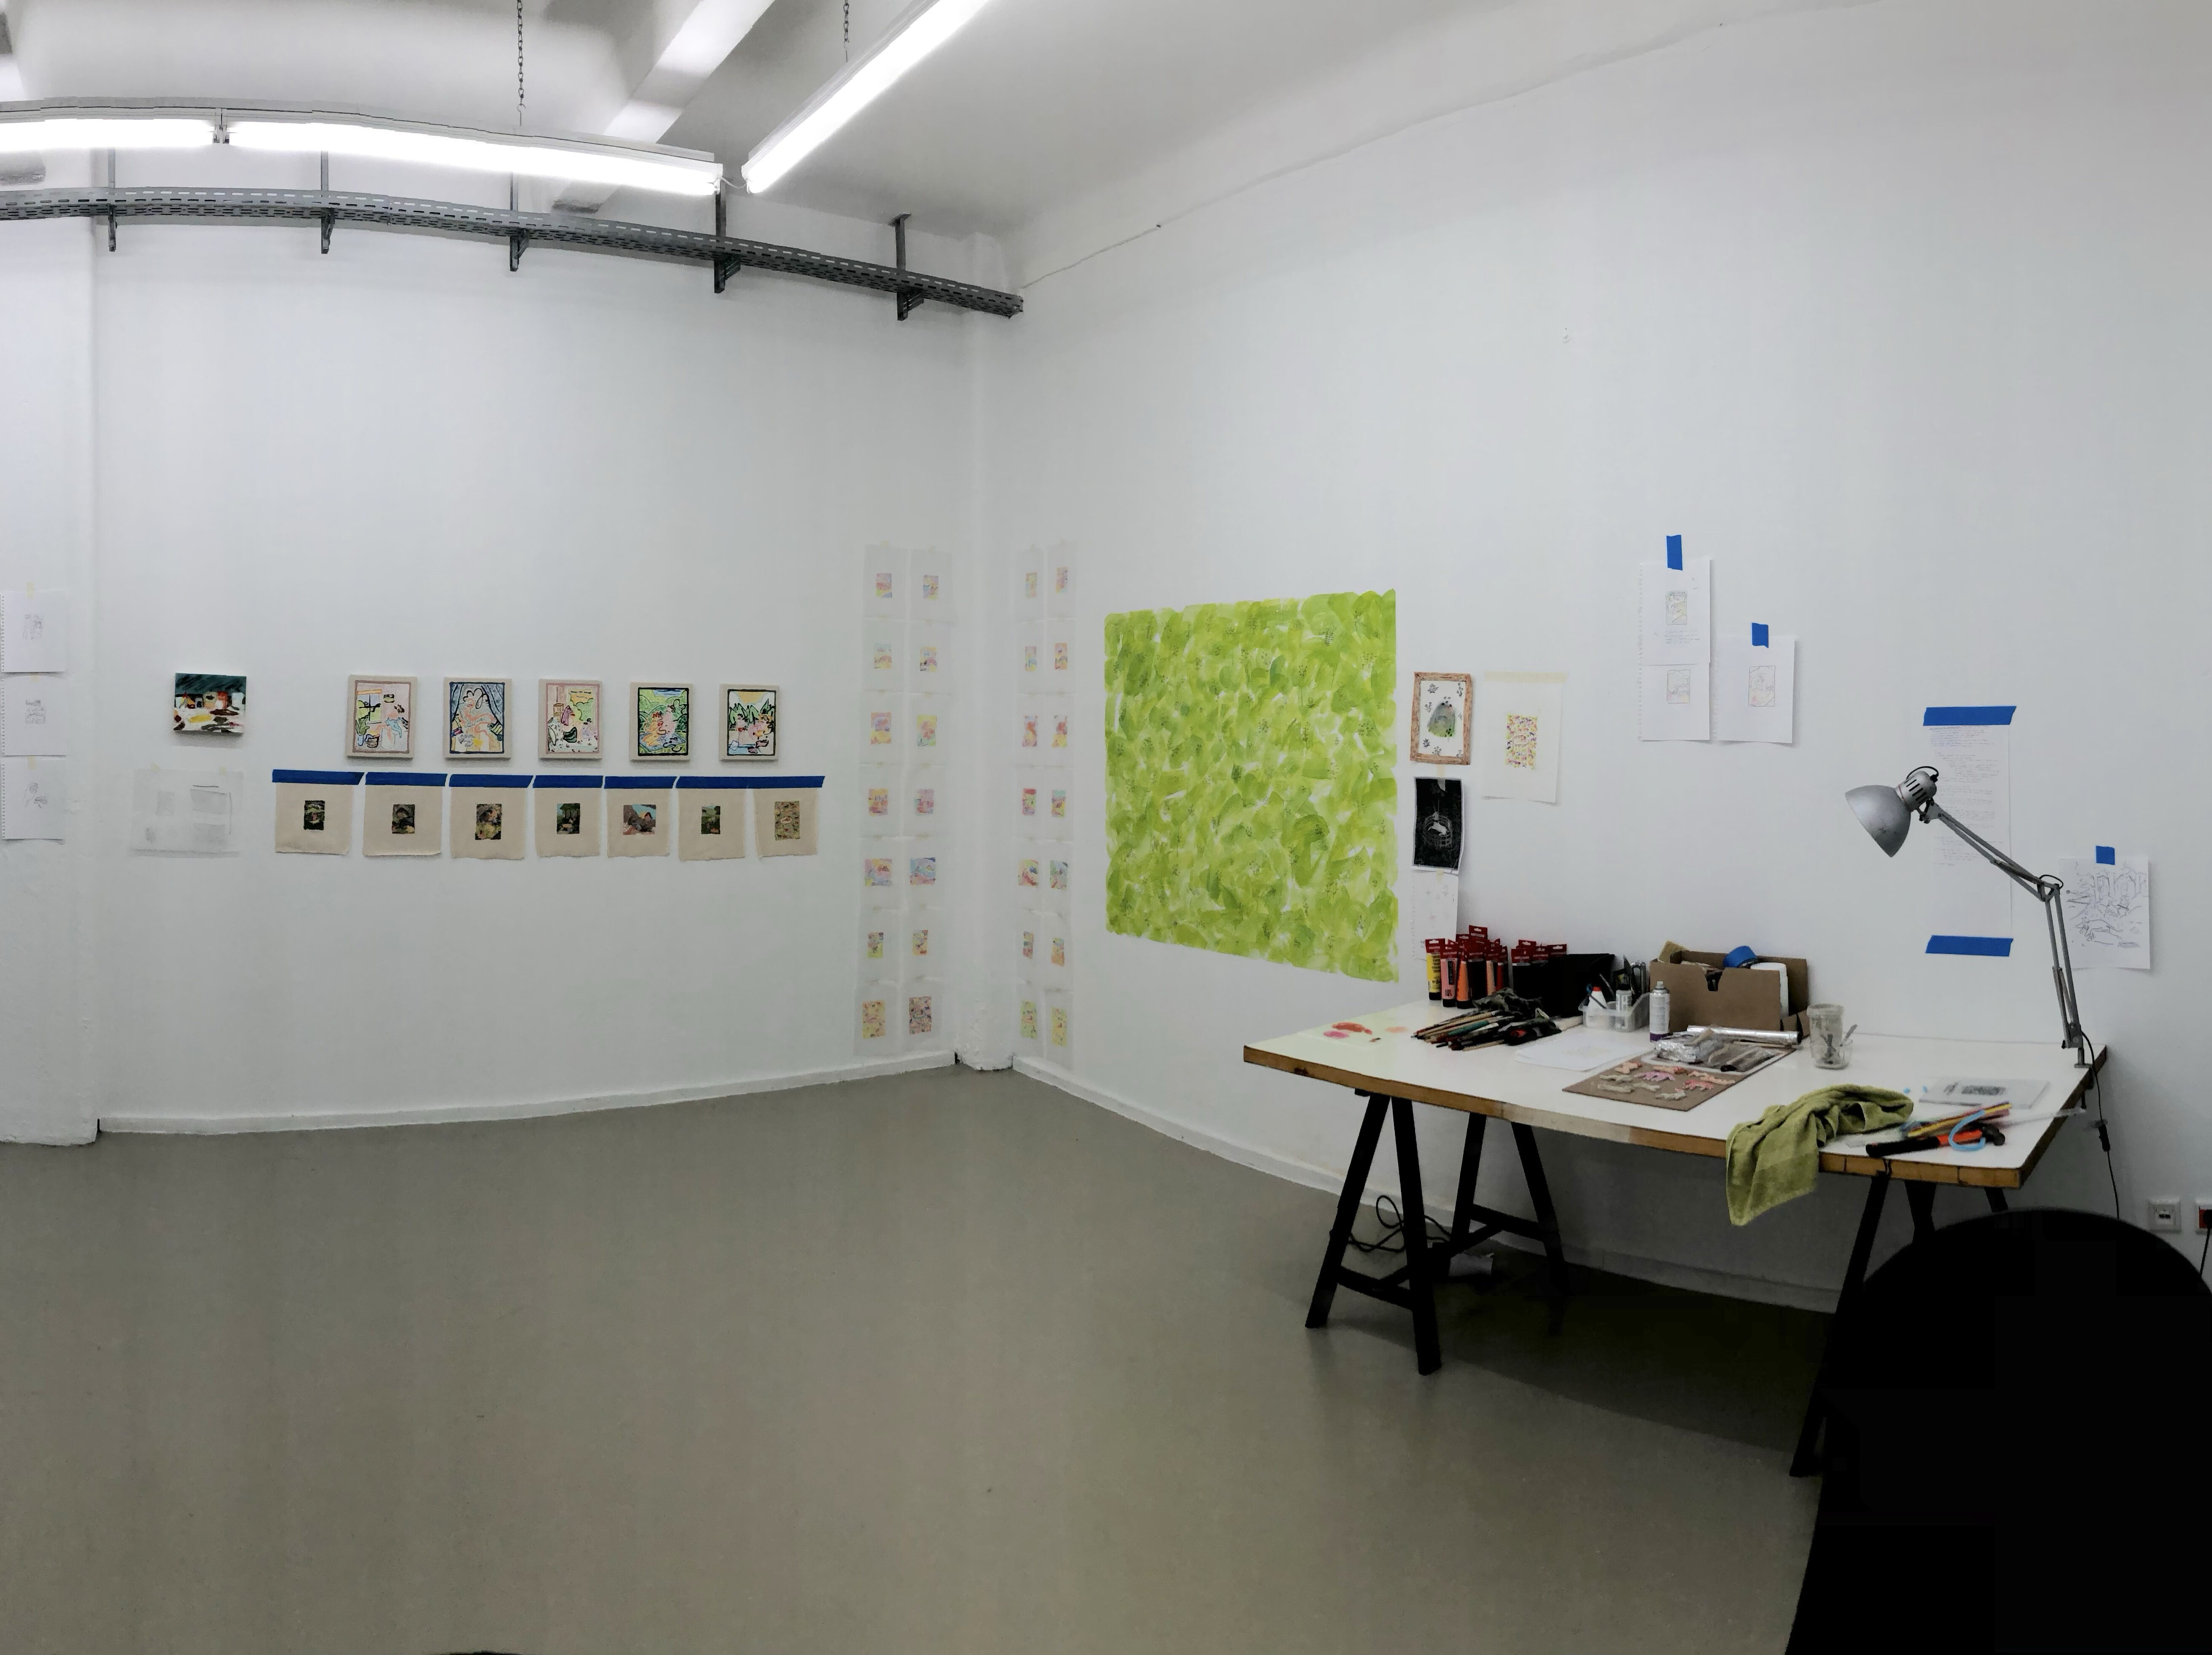 Photograph shows a 180 degree view of an artist studio. The right side of the frame there are three large windows one of which is open. The frames a pulled open and there is a view of a 6 story building out it. In the center of the frame is an artists work table with a lamp and materials and tools. On the walls there is one large bright green painting, a large figurative sketch and numerous small studies for paintings and drawings on paper, taped up on the wall with masking tape.